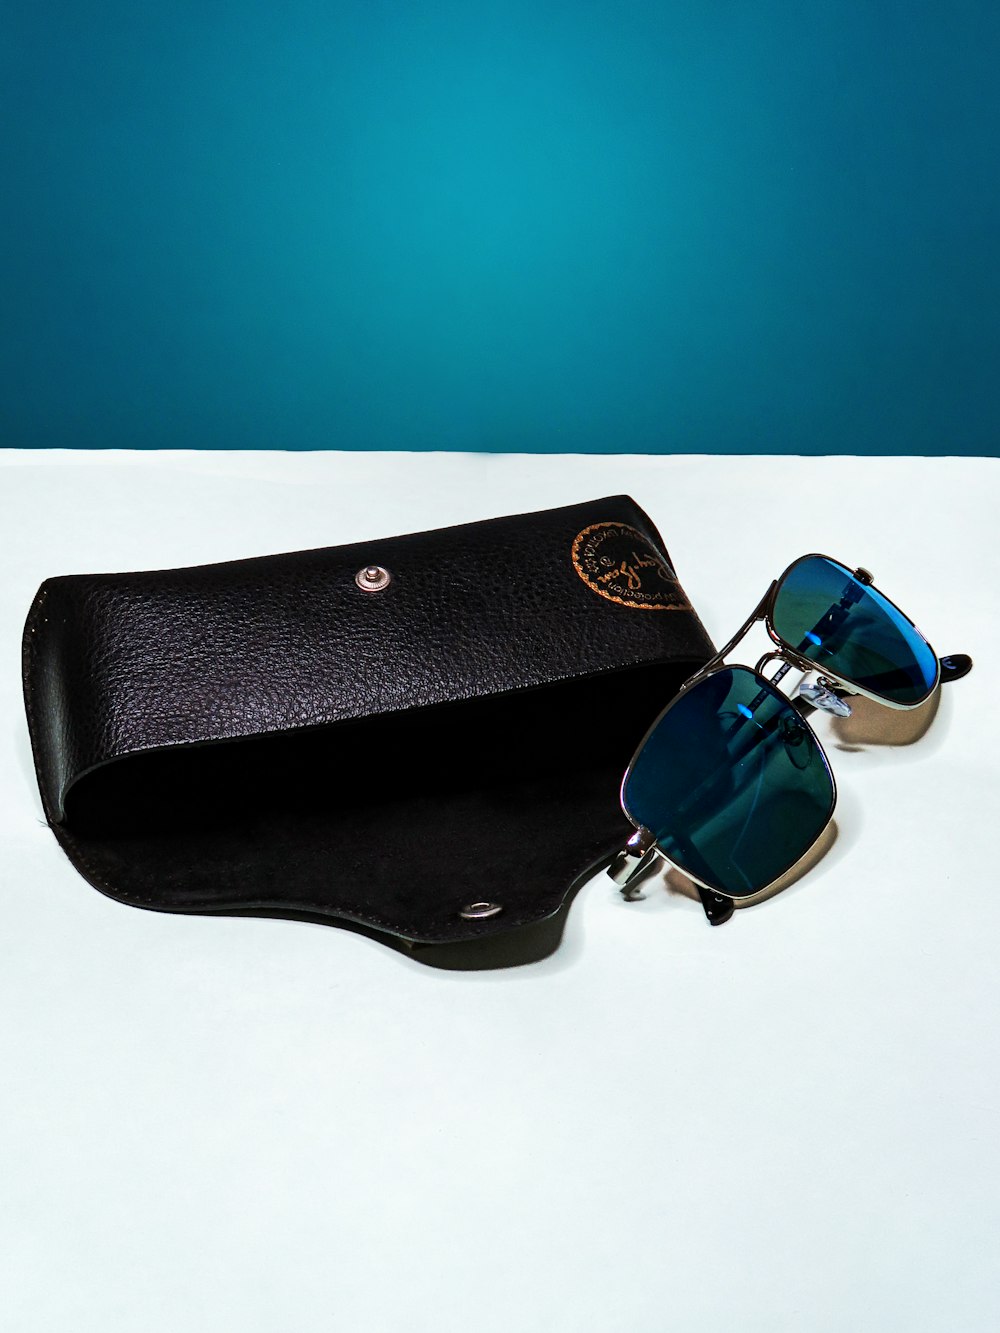 black sunglasses on black leather pouch